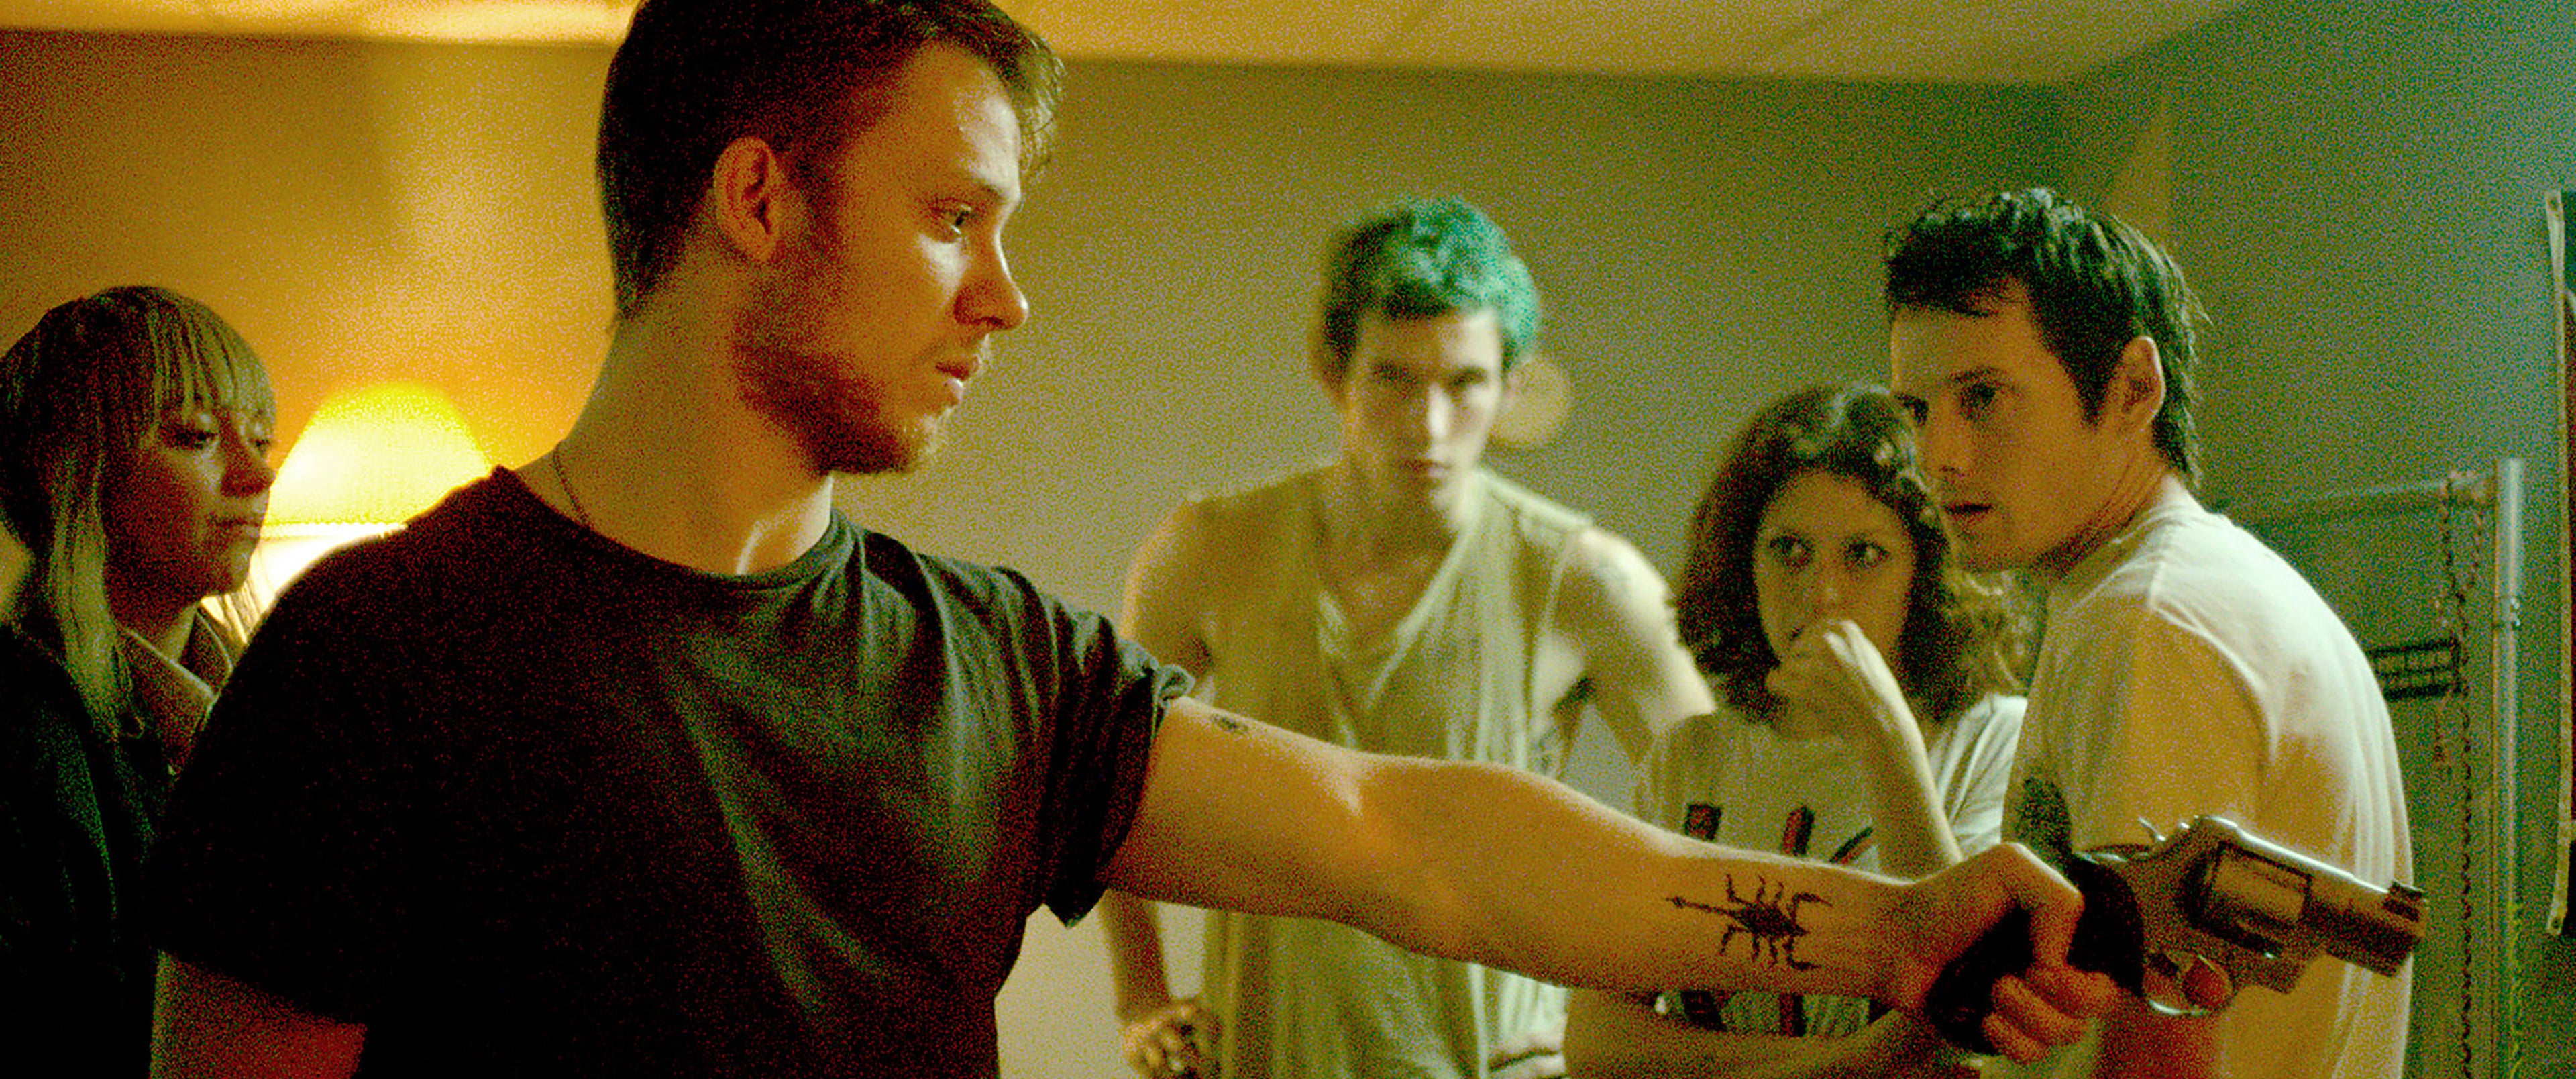 Still image from Green Room, Joe Cole points a gun at offscreen figure, Anton Yelchin in background